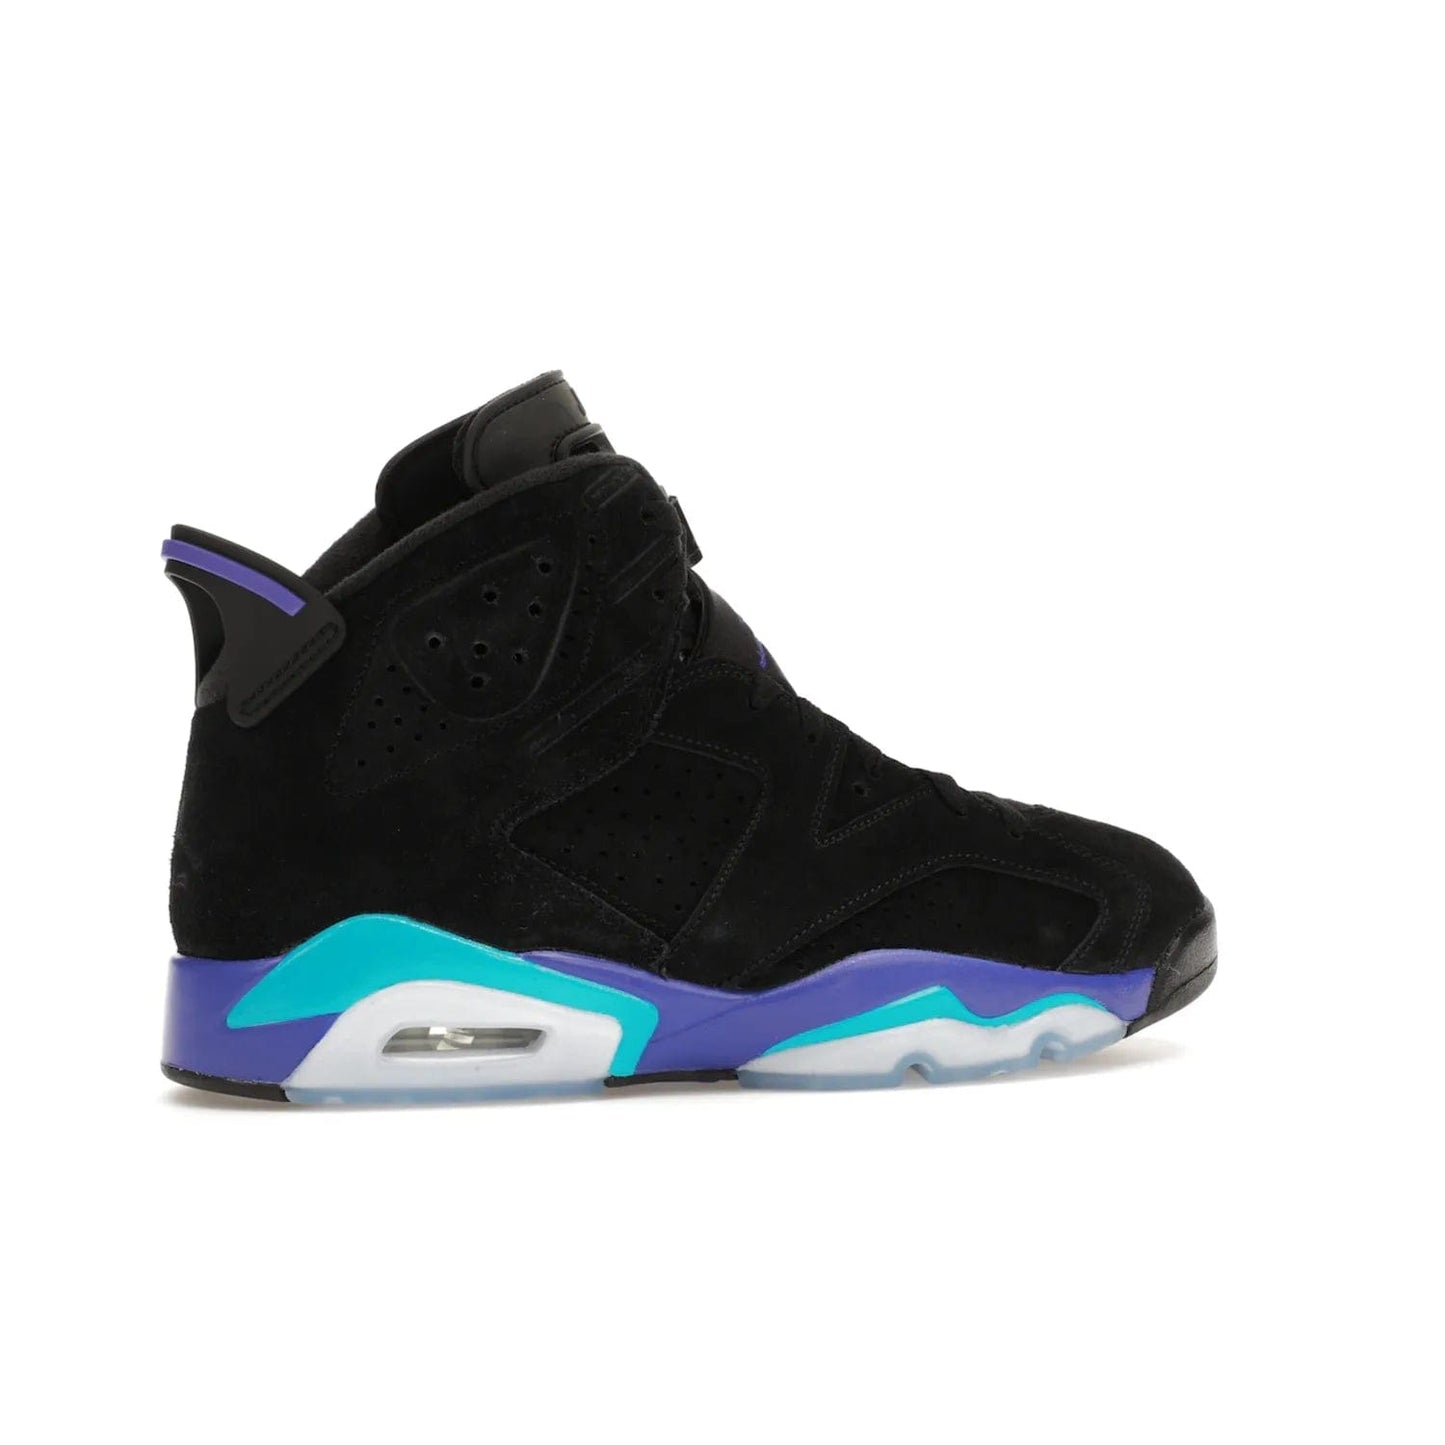 Jordan 6 Retro Aqua - Image 35 - Only at www.BallersClubKickz.com - Feel the classic Jordan 6 Retro Aqua paired with modern style. Black, Bright Concord, and Aquatone hues are crafted with a supple suede and rubberized heel tab. This standout sneaker adds signature Jordan elements at $200. Elevate your style with the Jordan 6 Retro Aqua.